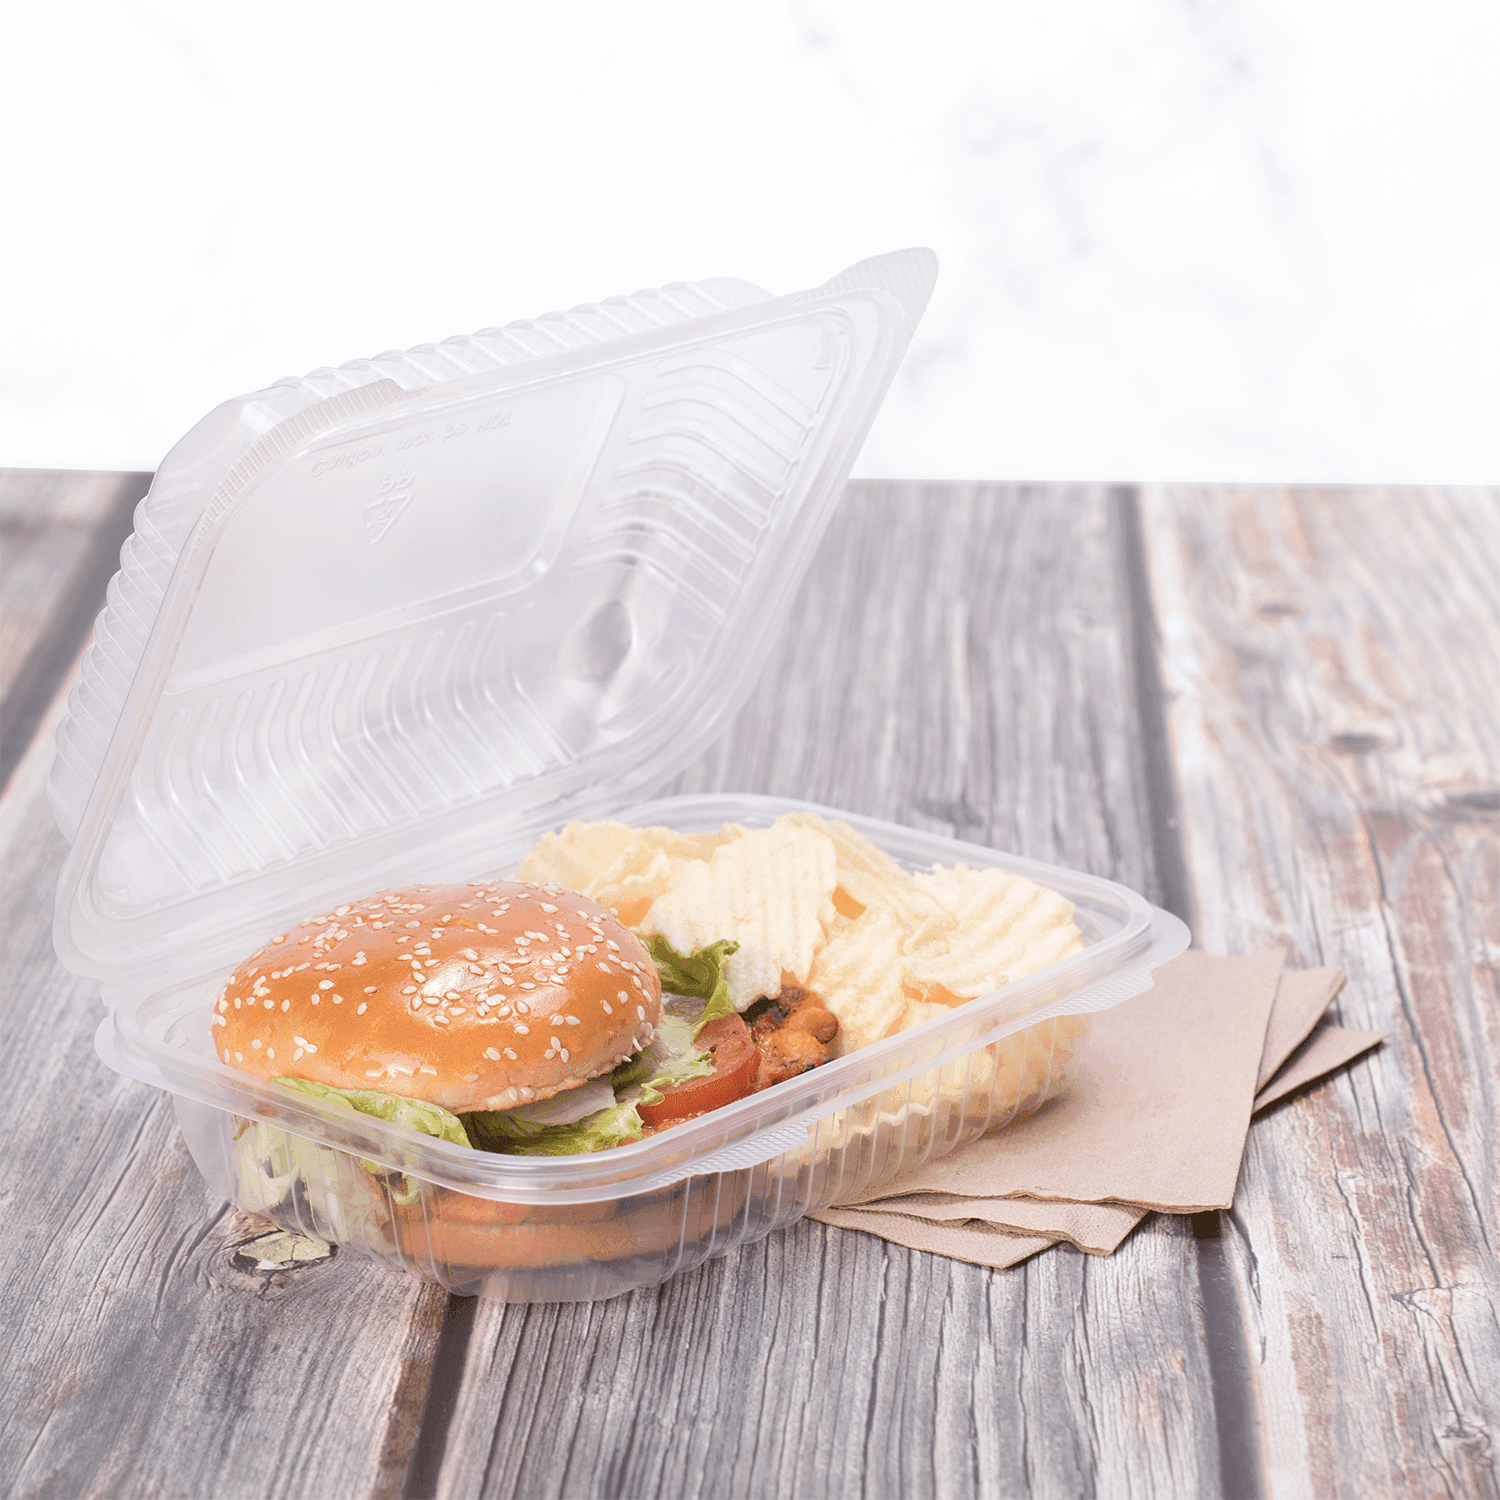 Clear Karat 9'' x 6" PP Plastic Hinged Container with burger and fries